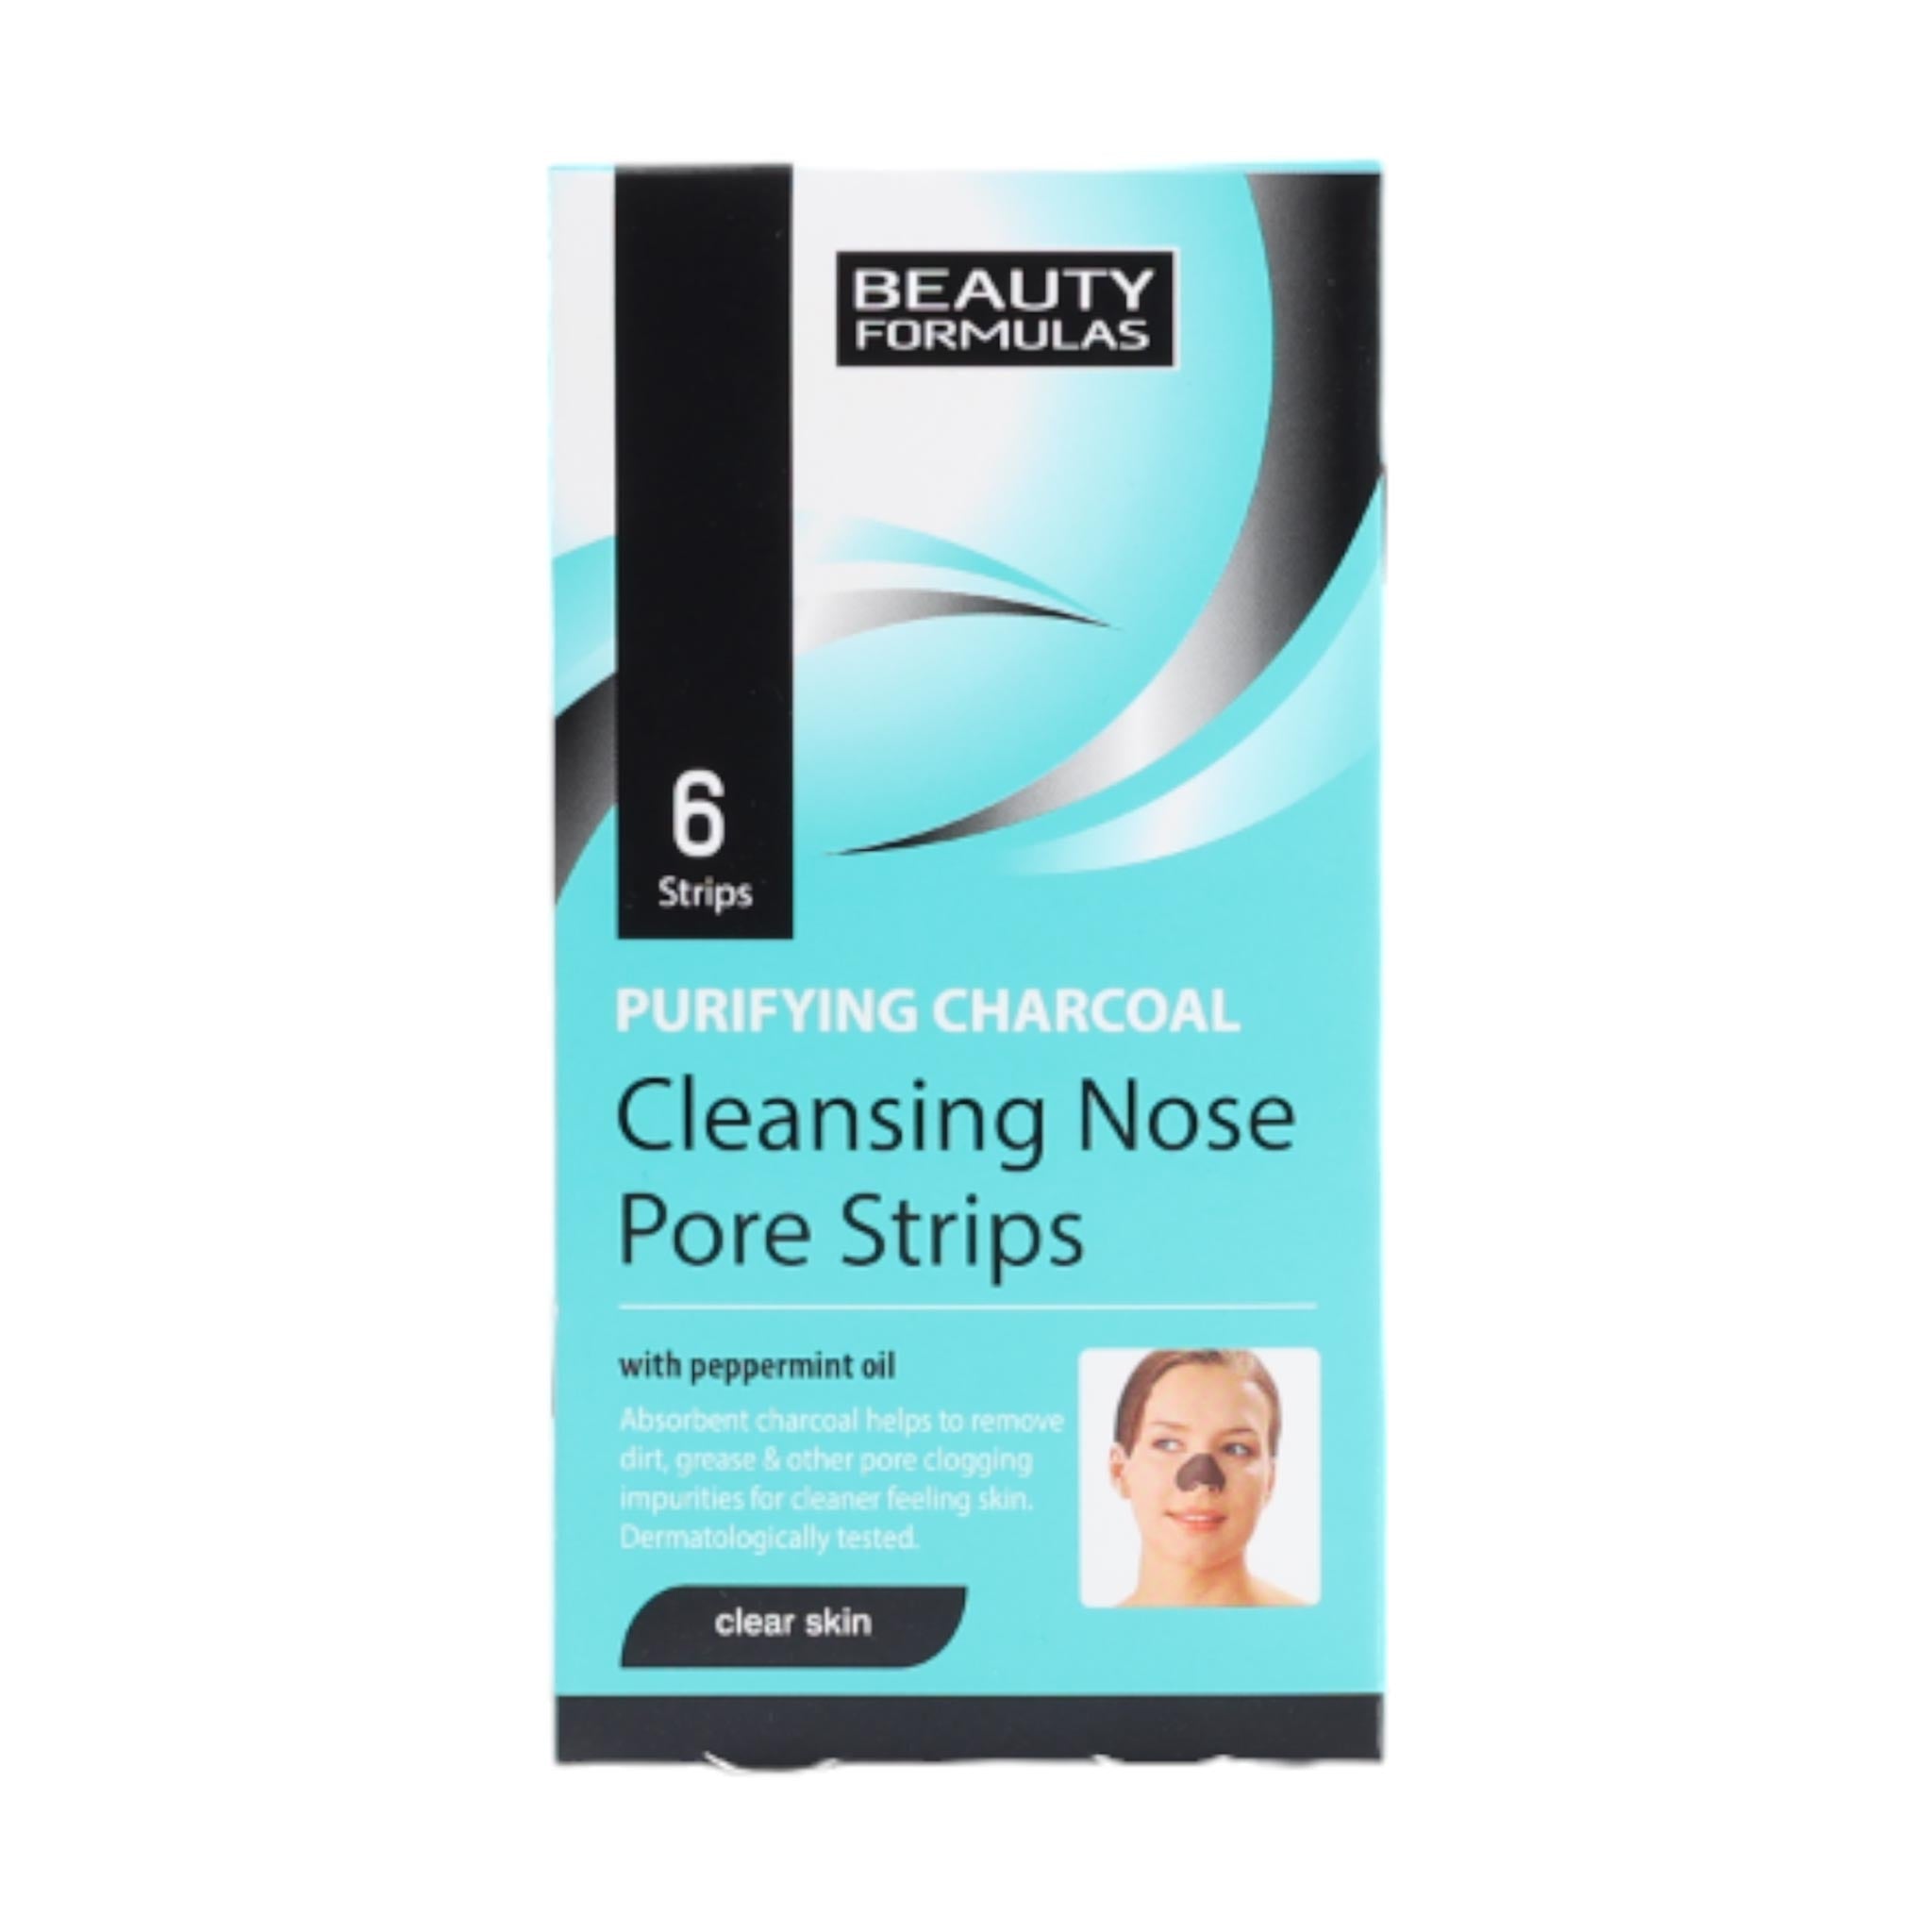 Beauty Formulas Purifying Charcoal Cleansing Nose Pore Strips 6 pieces